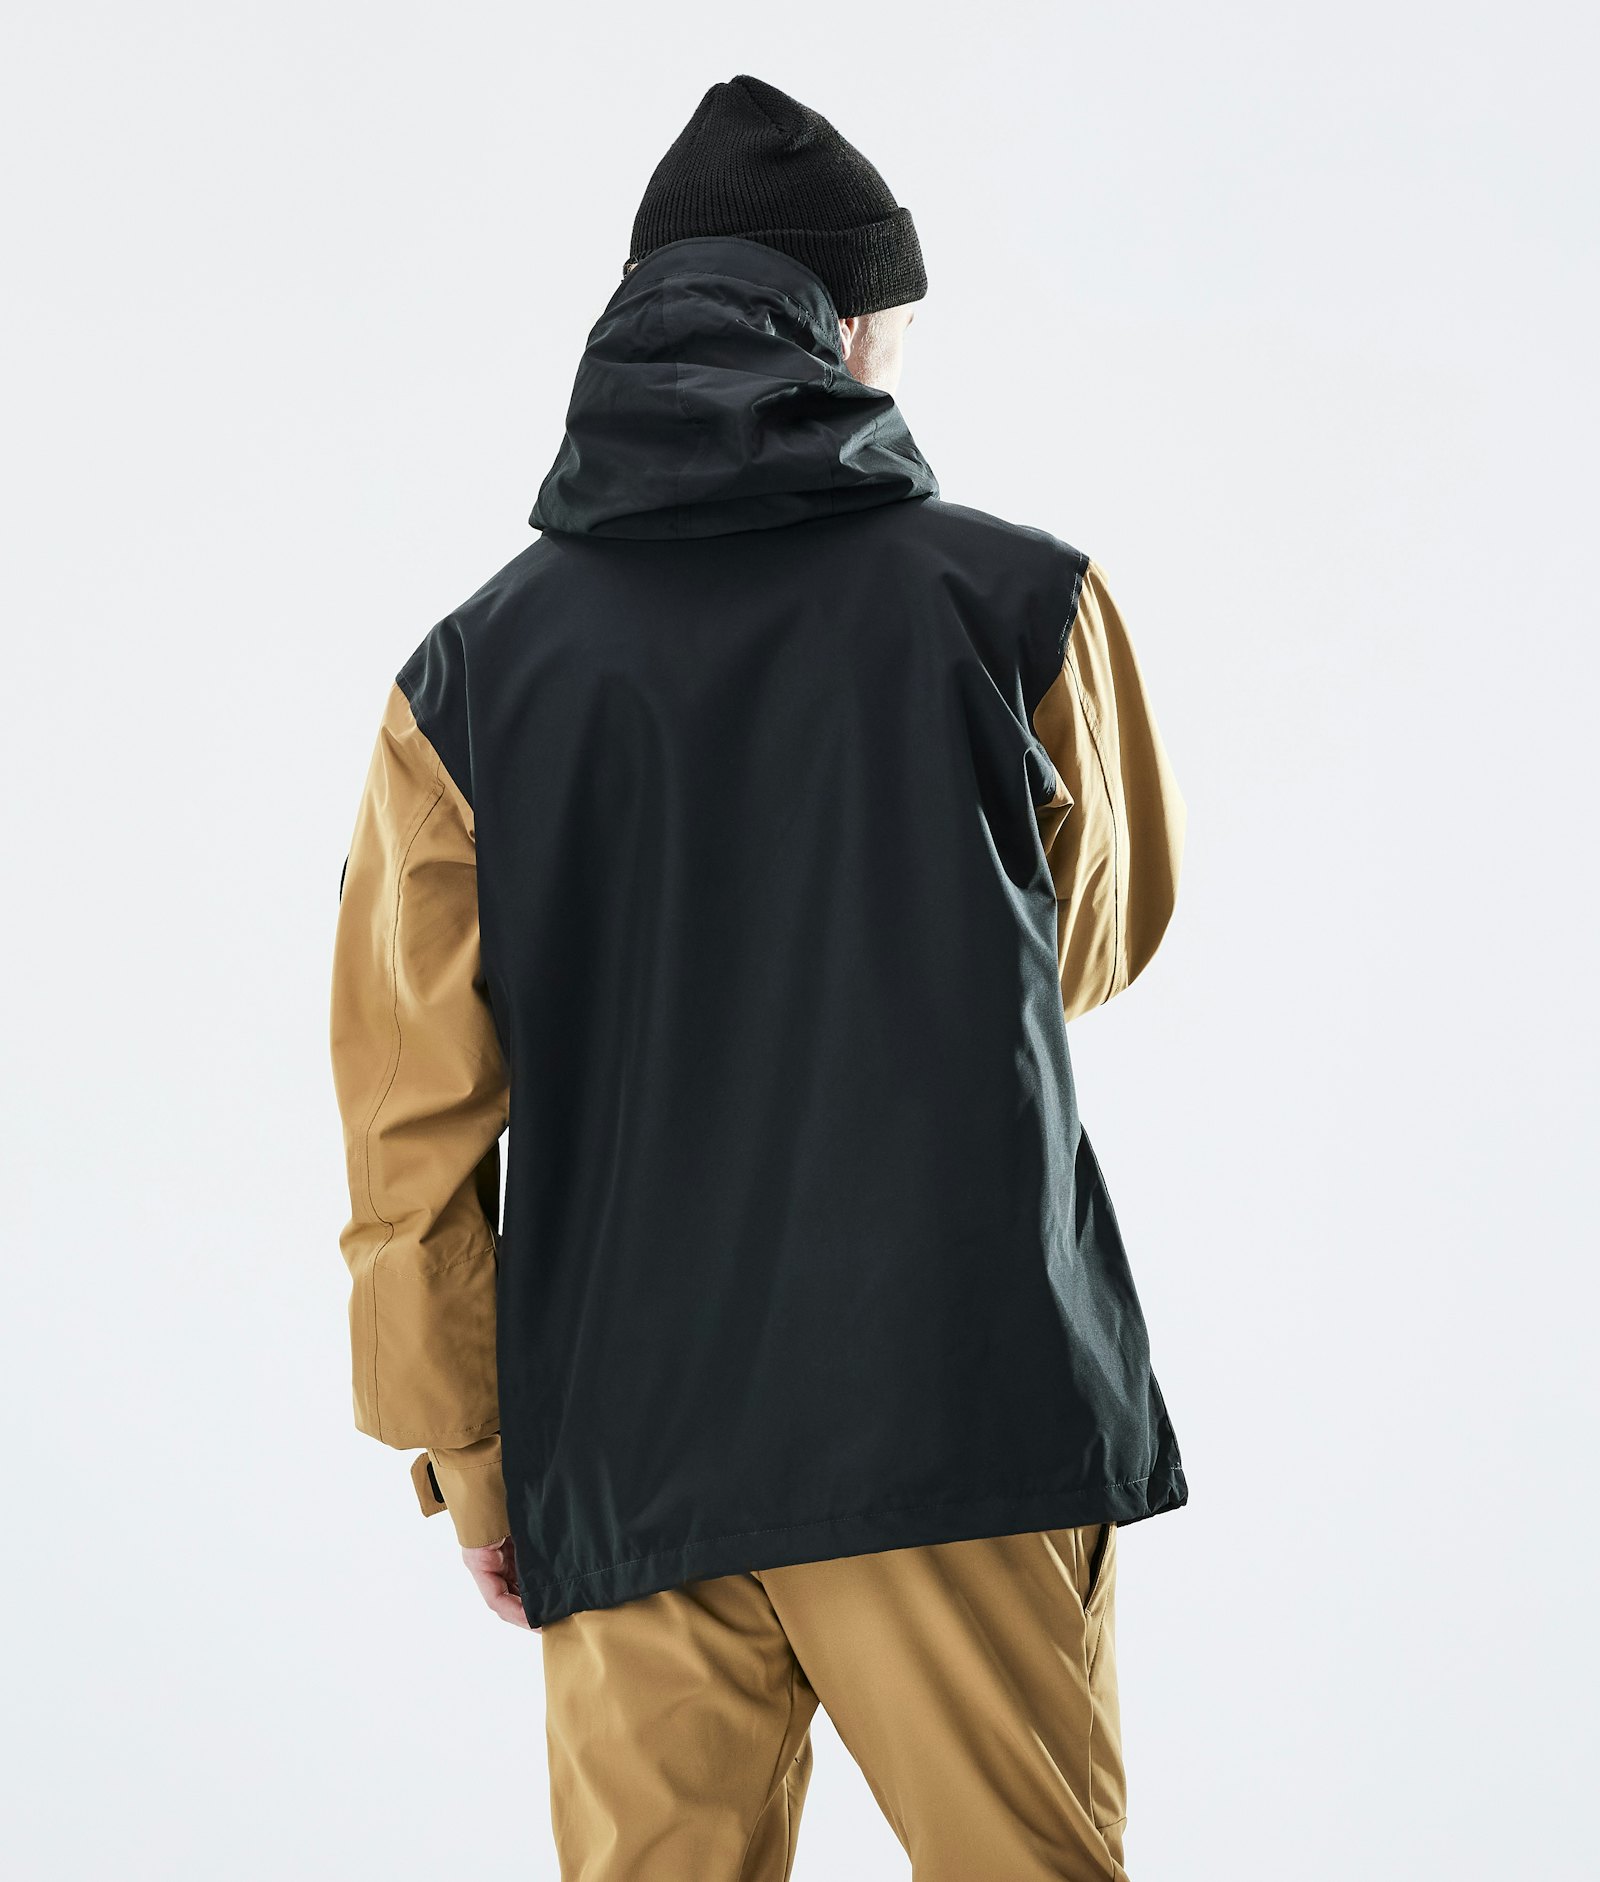 Dope Blizzard 2020 Giacca Outdoor Uomo Gold/Black